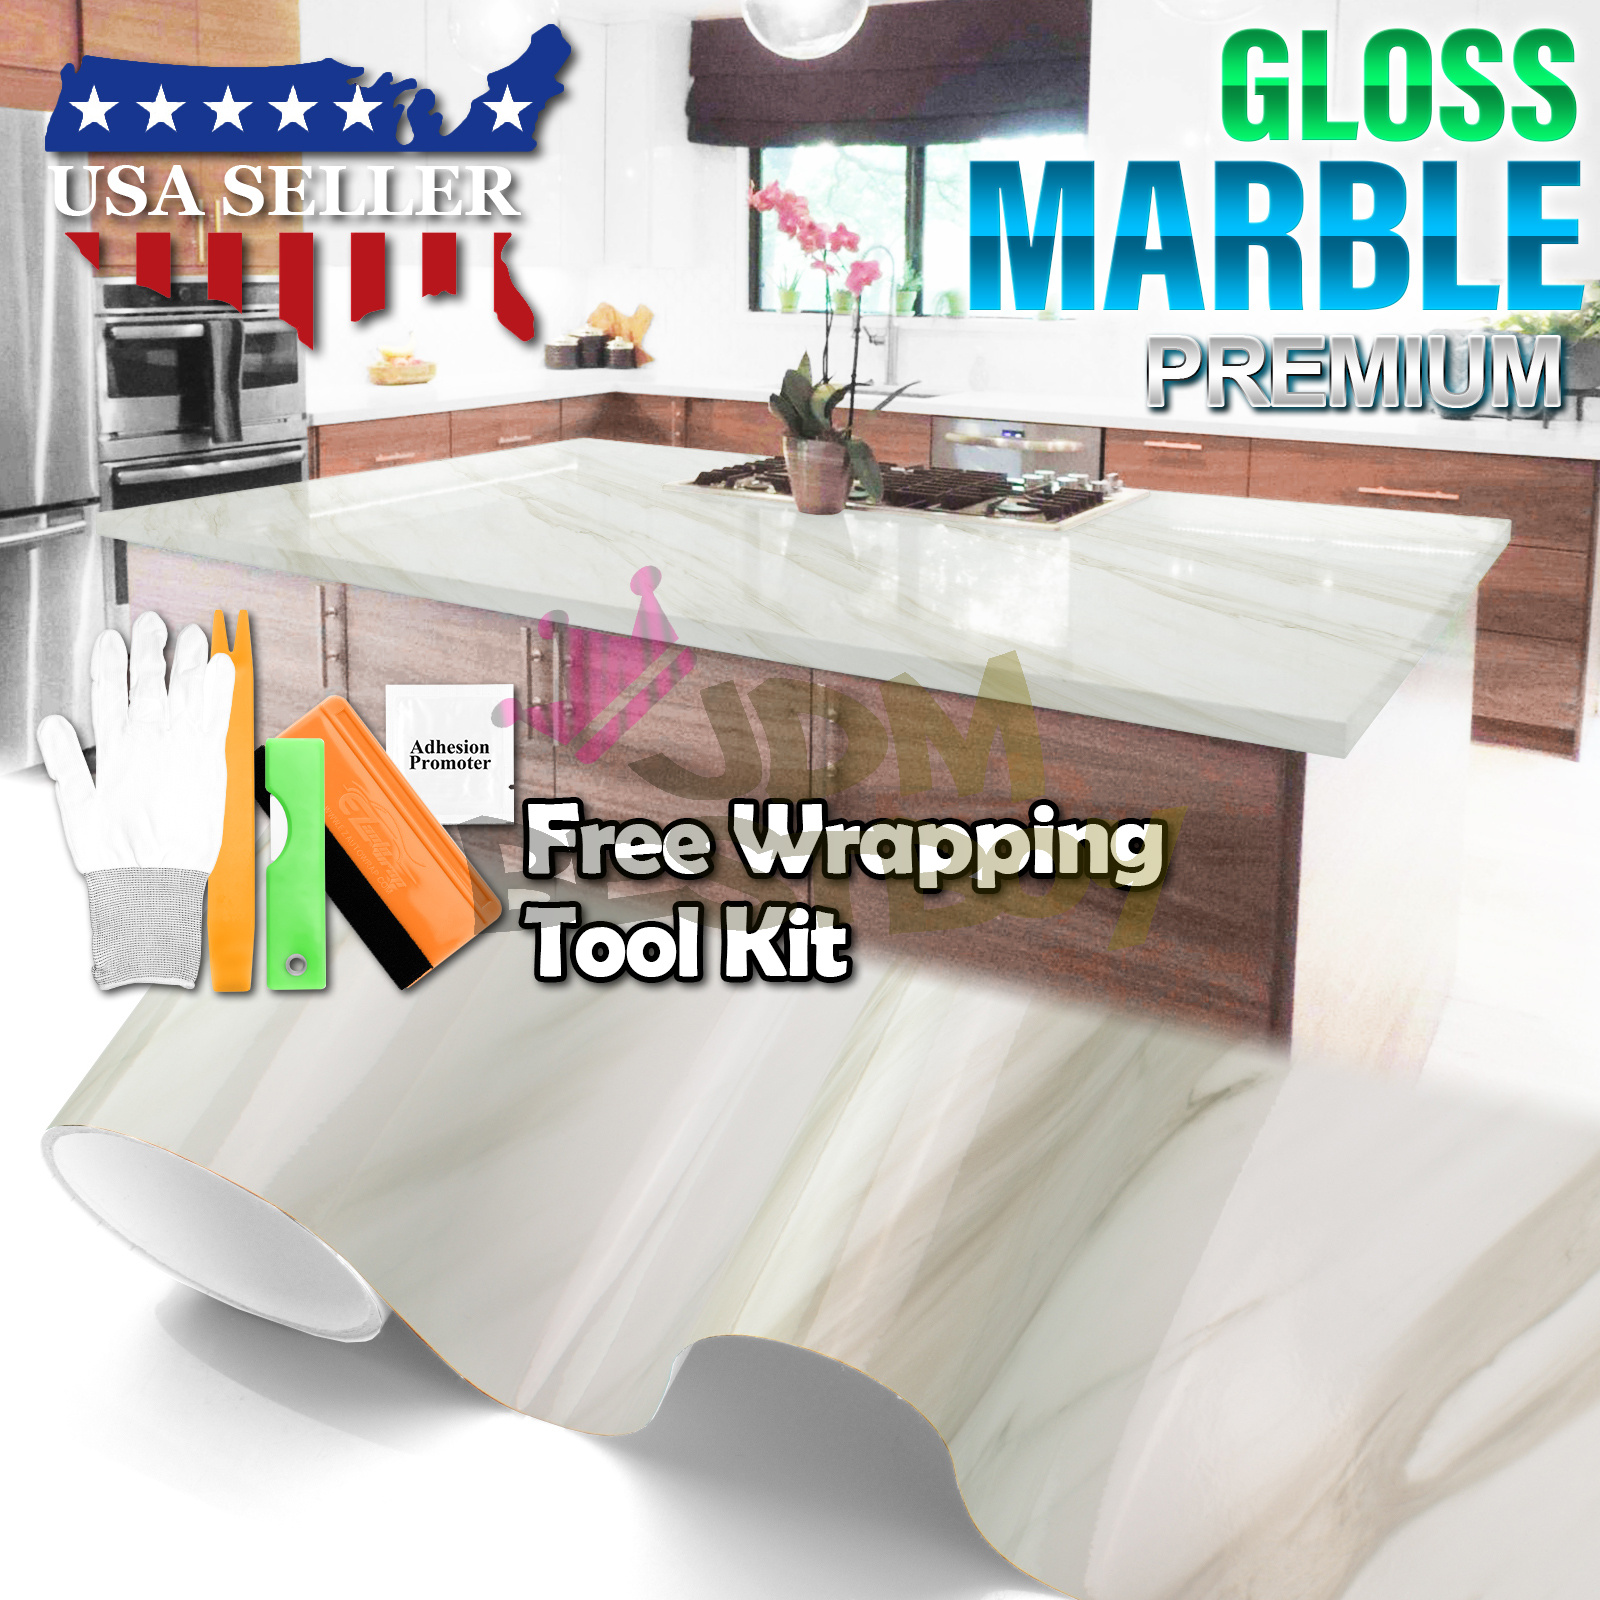 Details About Premium Gloss Marble Granite Look Vinyl Wrap Contact Paper Home Kitchen D01